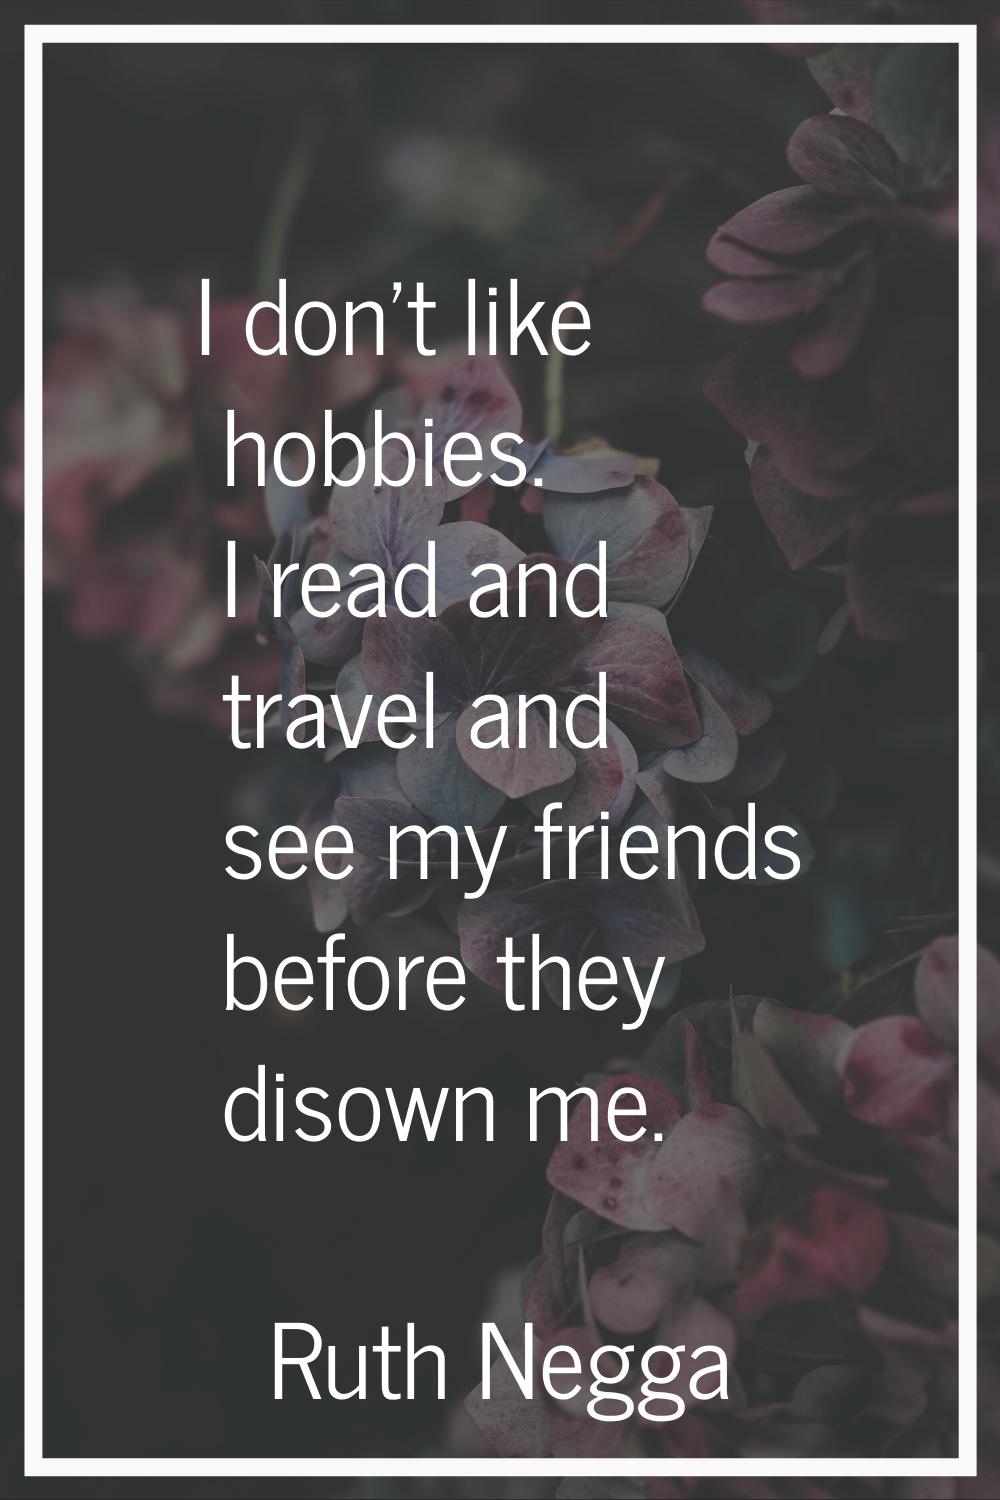 I don't like hobbies. I read and travel and see my friends before they disown me.